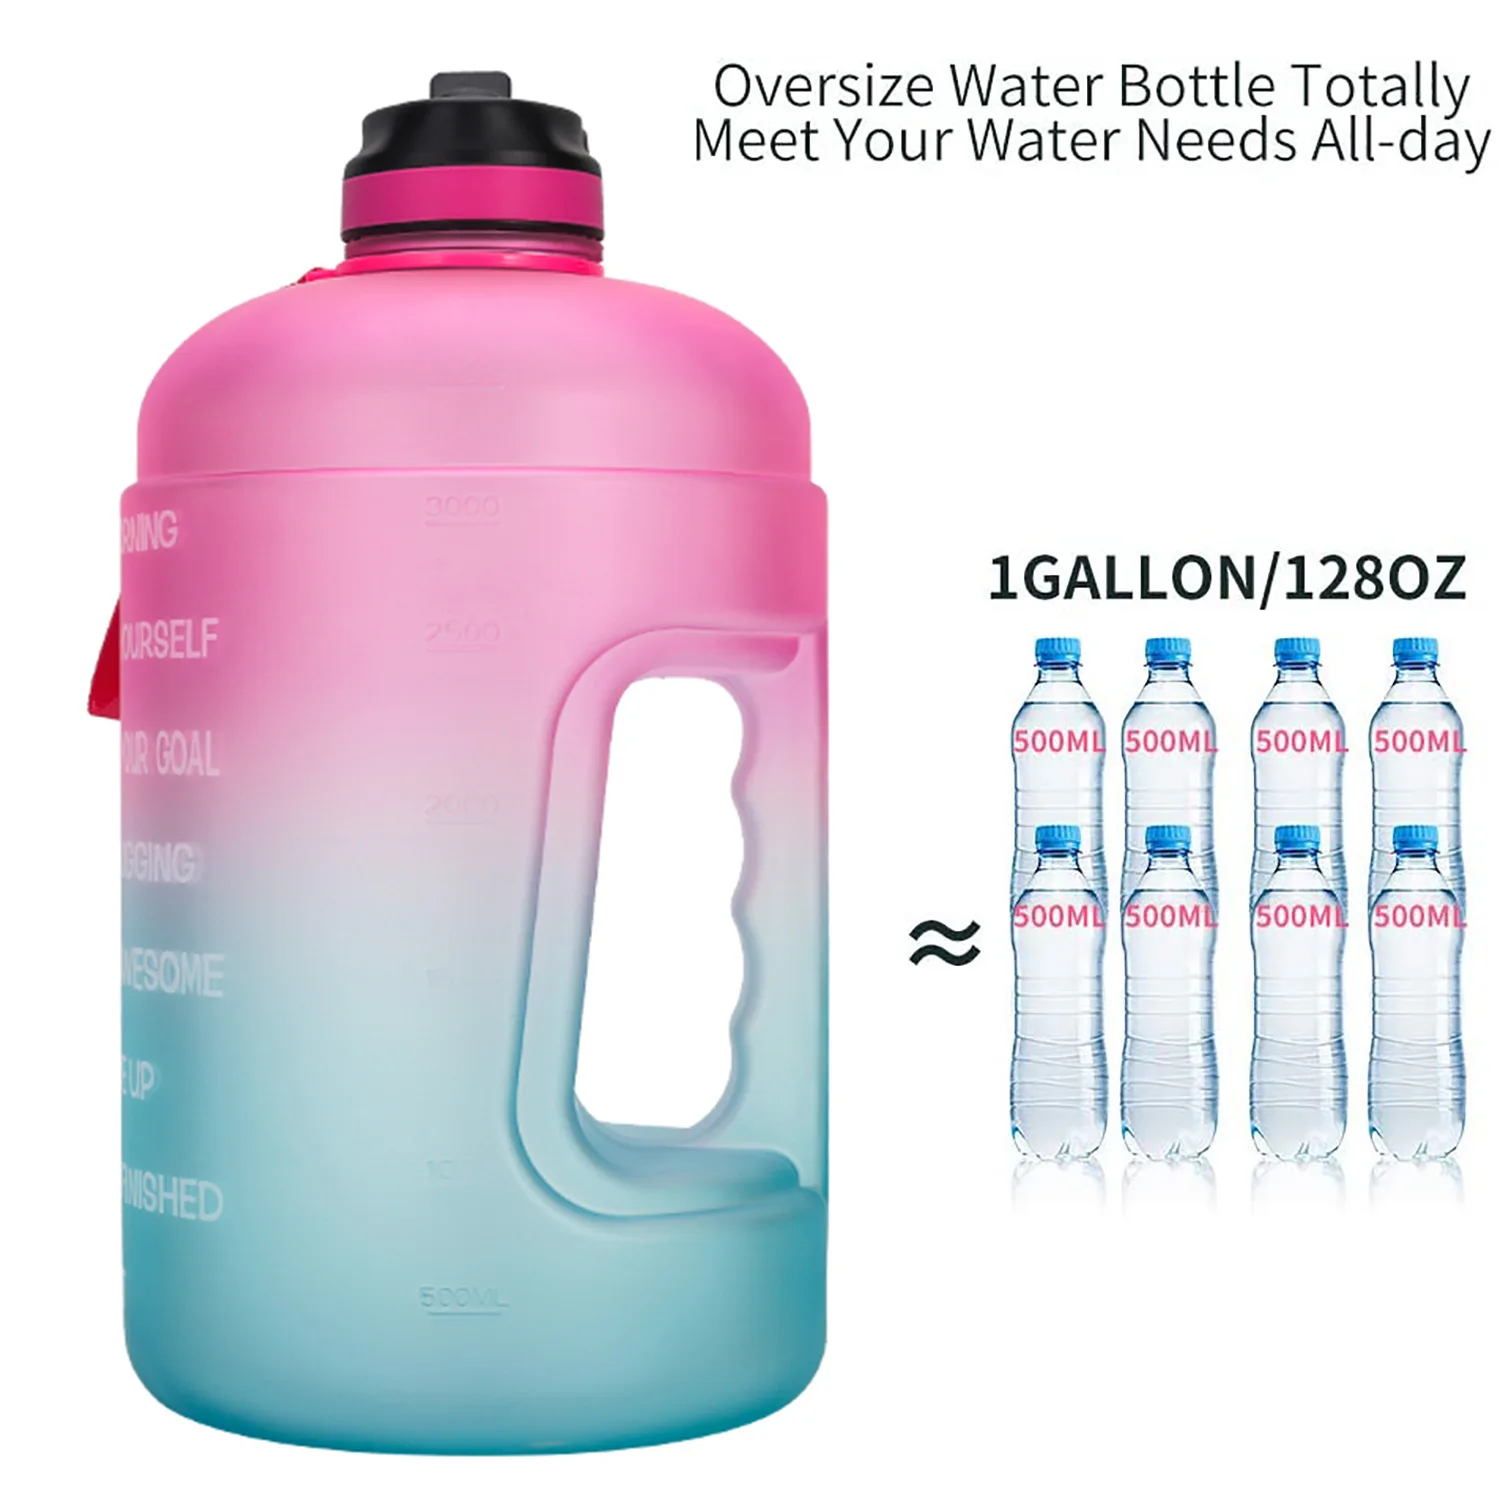 USSE 1 Gallon Water Bottle with Straw & Motivational Time Marker, BPA Free Reusable Gym Sports Outdoor Large Capacity Water Jug